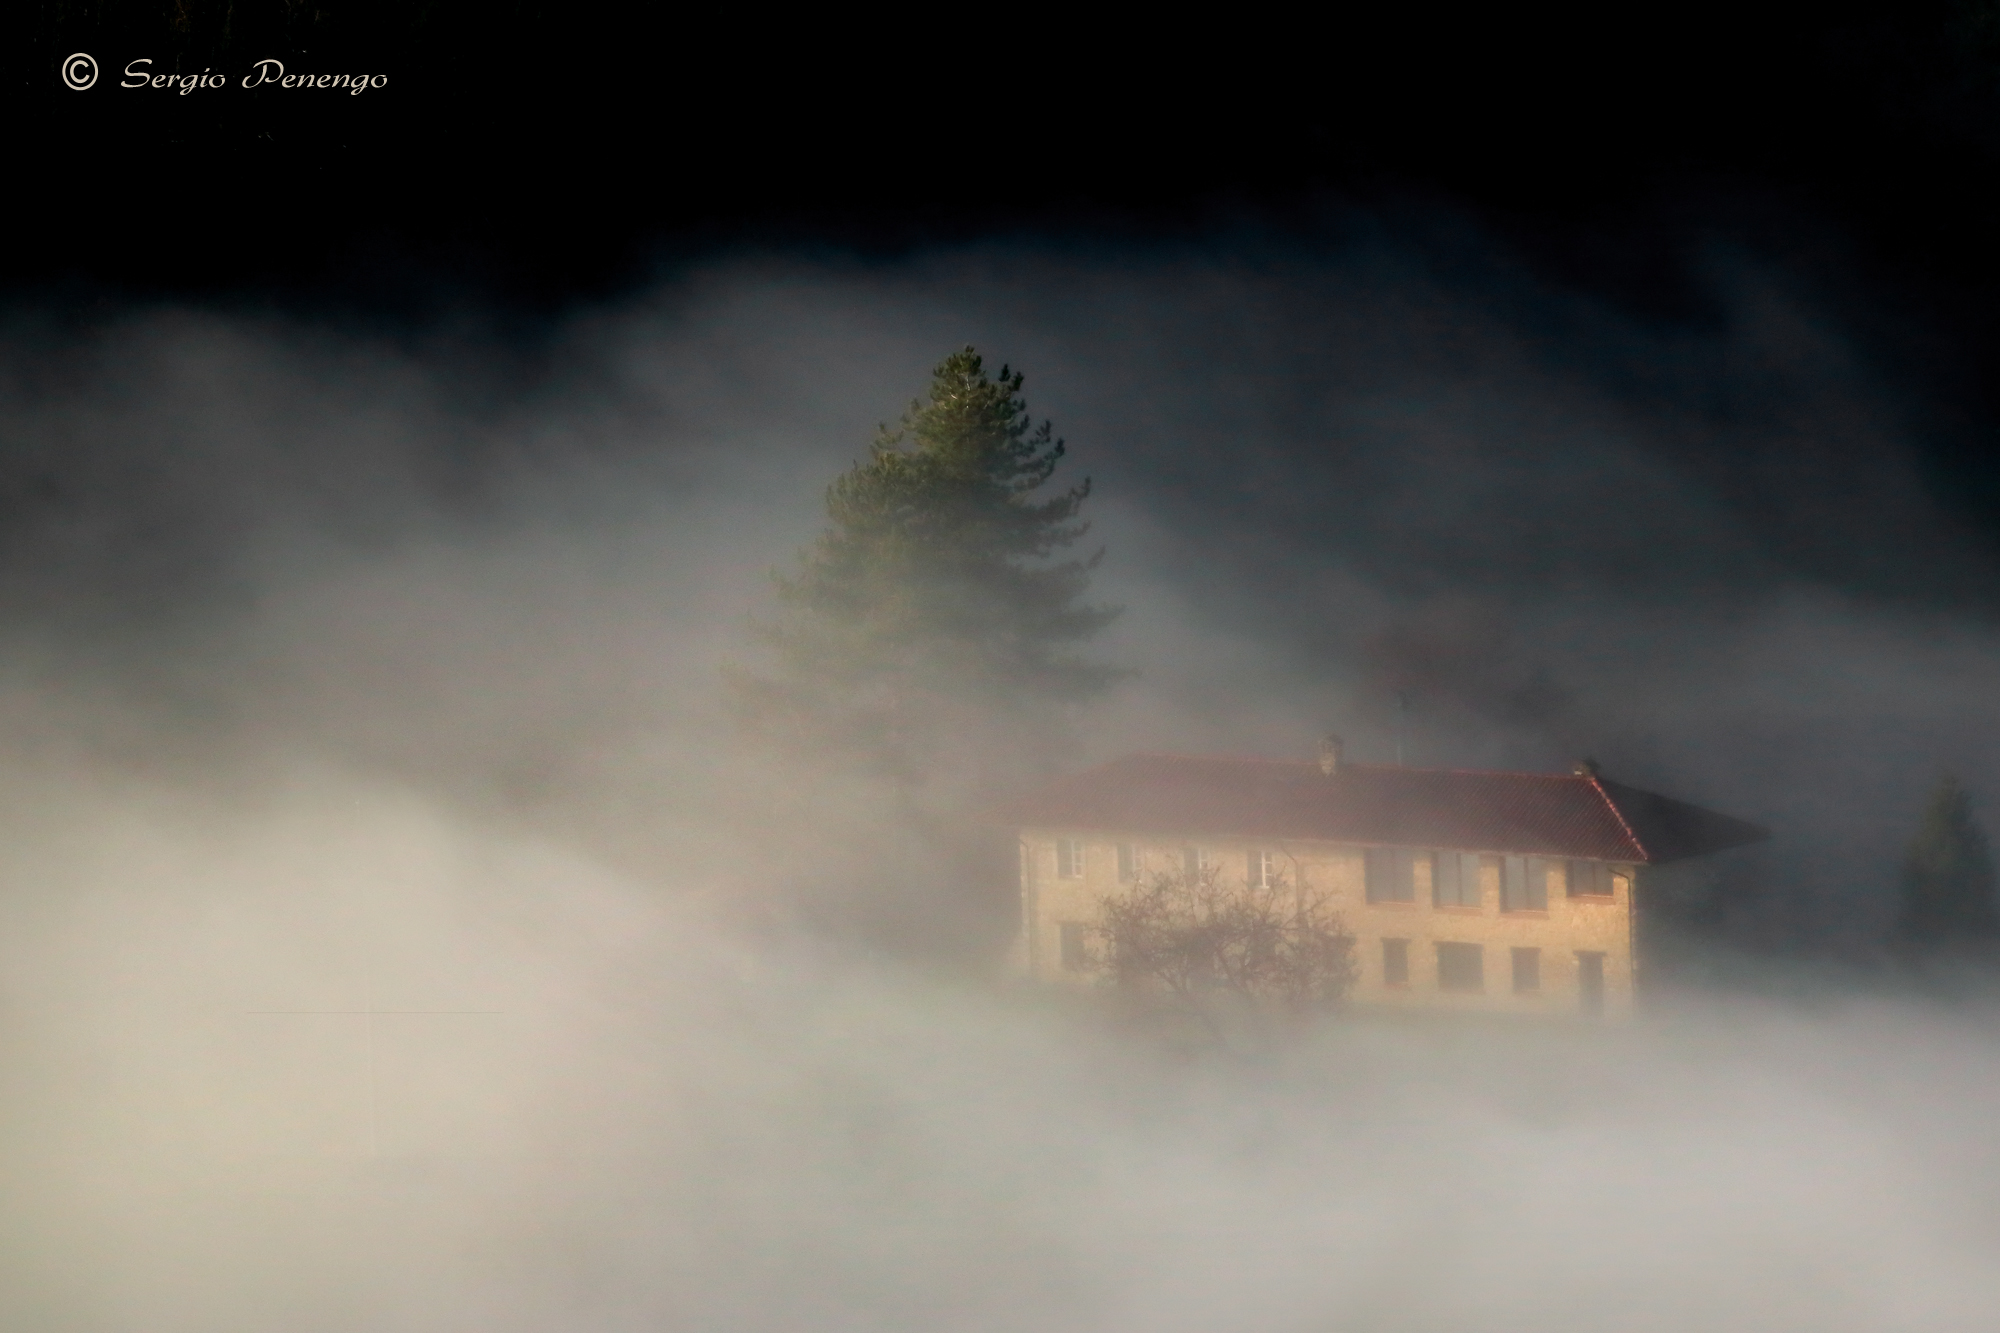 "THE HOUSE IN THE FOG"...